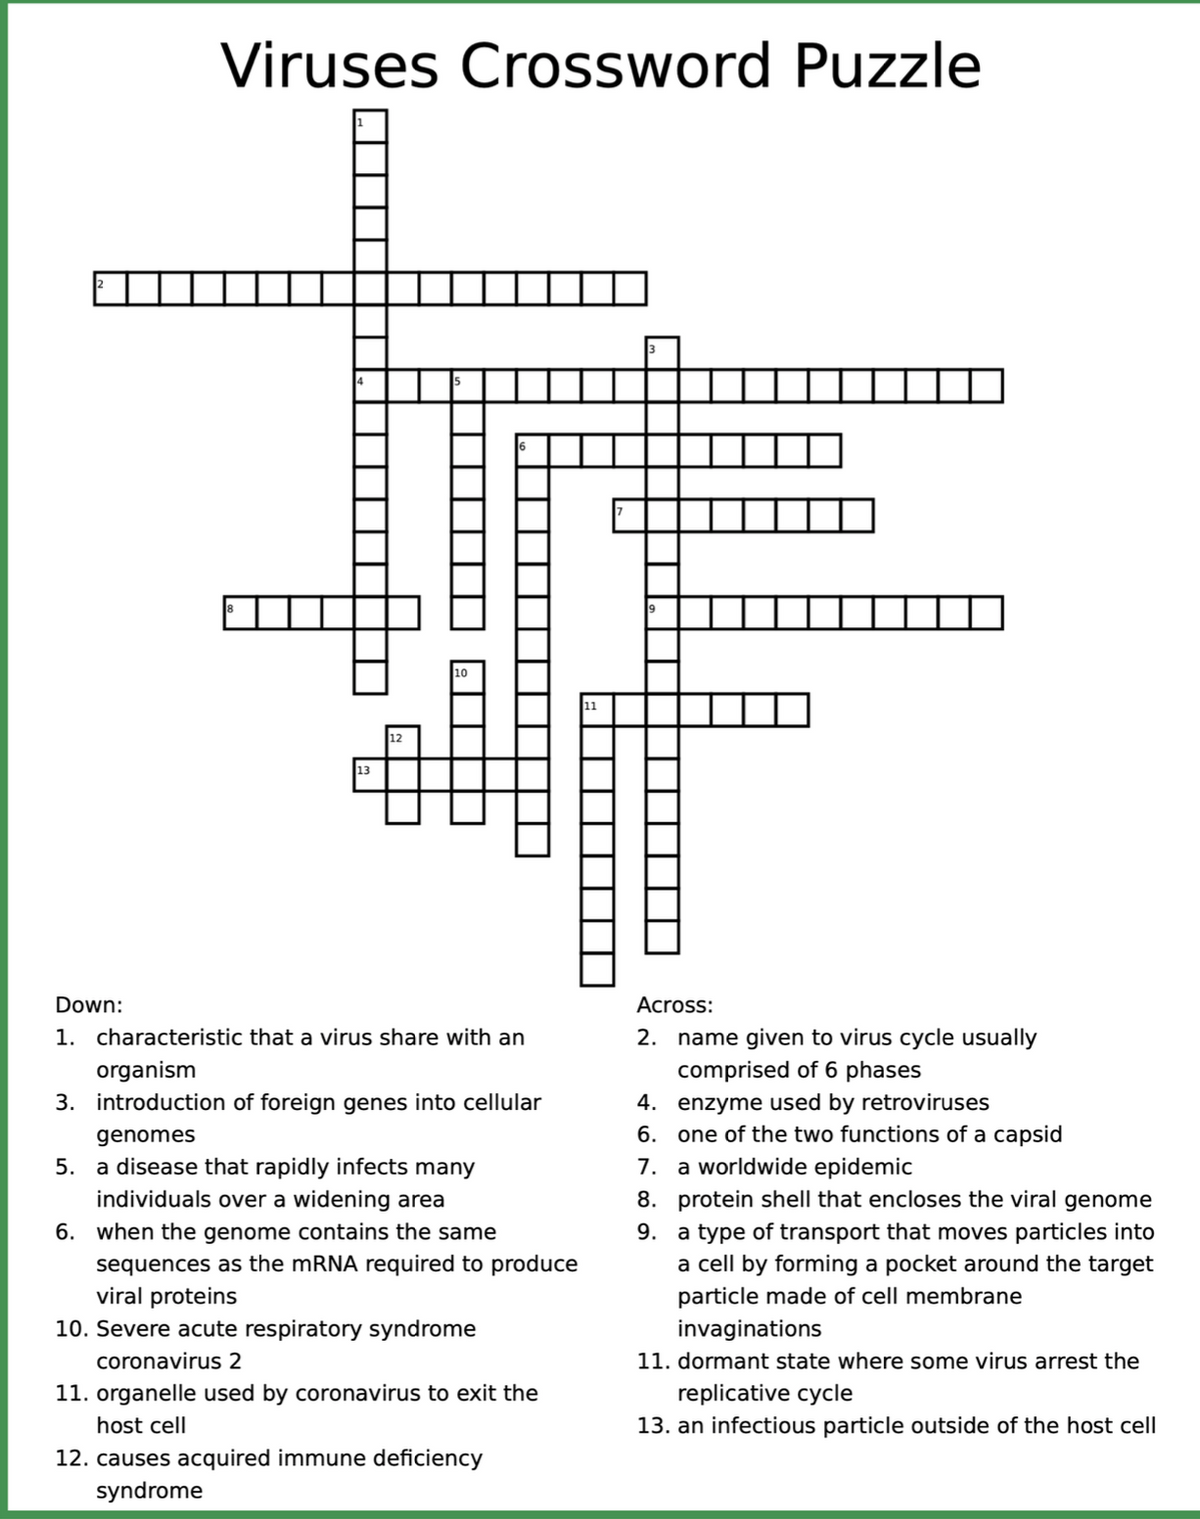 Viruses Crossword Puzzle
12
Down:
Across:
1. characteristic that a virus share with an
2. name given to virus cycle usually
organism
comprised of 6 phases
4. enzyme used by retroviruses
6. one of the two functions of a capsid
7. a worldwide epidemic
3. introduction of foreign genes into cellular
genomes
5. a disease that rapidly infects many
individuals over a widening area
8. protein shell that encloses the viral
9. a type of transport that moves particles into
a cell by forming a pocket around the target
particle made of cell membrane
genome
6. when the genome contains the same
sequences as the MRNA required to produce
viral proteins
10. Severe acute respiratory syndrome
invaginations
11. dormant state where some virus arrest the
coronavirus 2
11. organelle used by coronavirus to exit the
replicative cycle
host cell
13. an infectious particle outside of the host cell
12. causes acquired immune deficiency
syndrome
